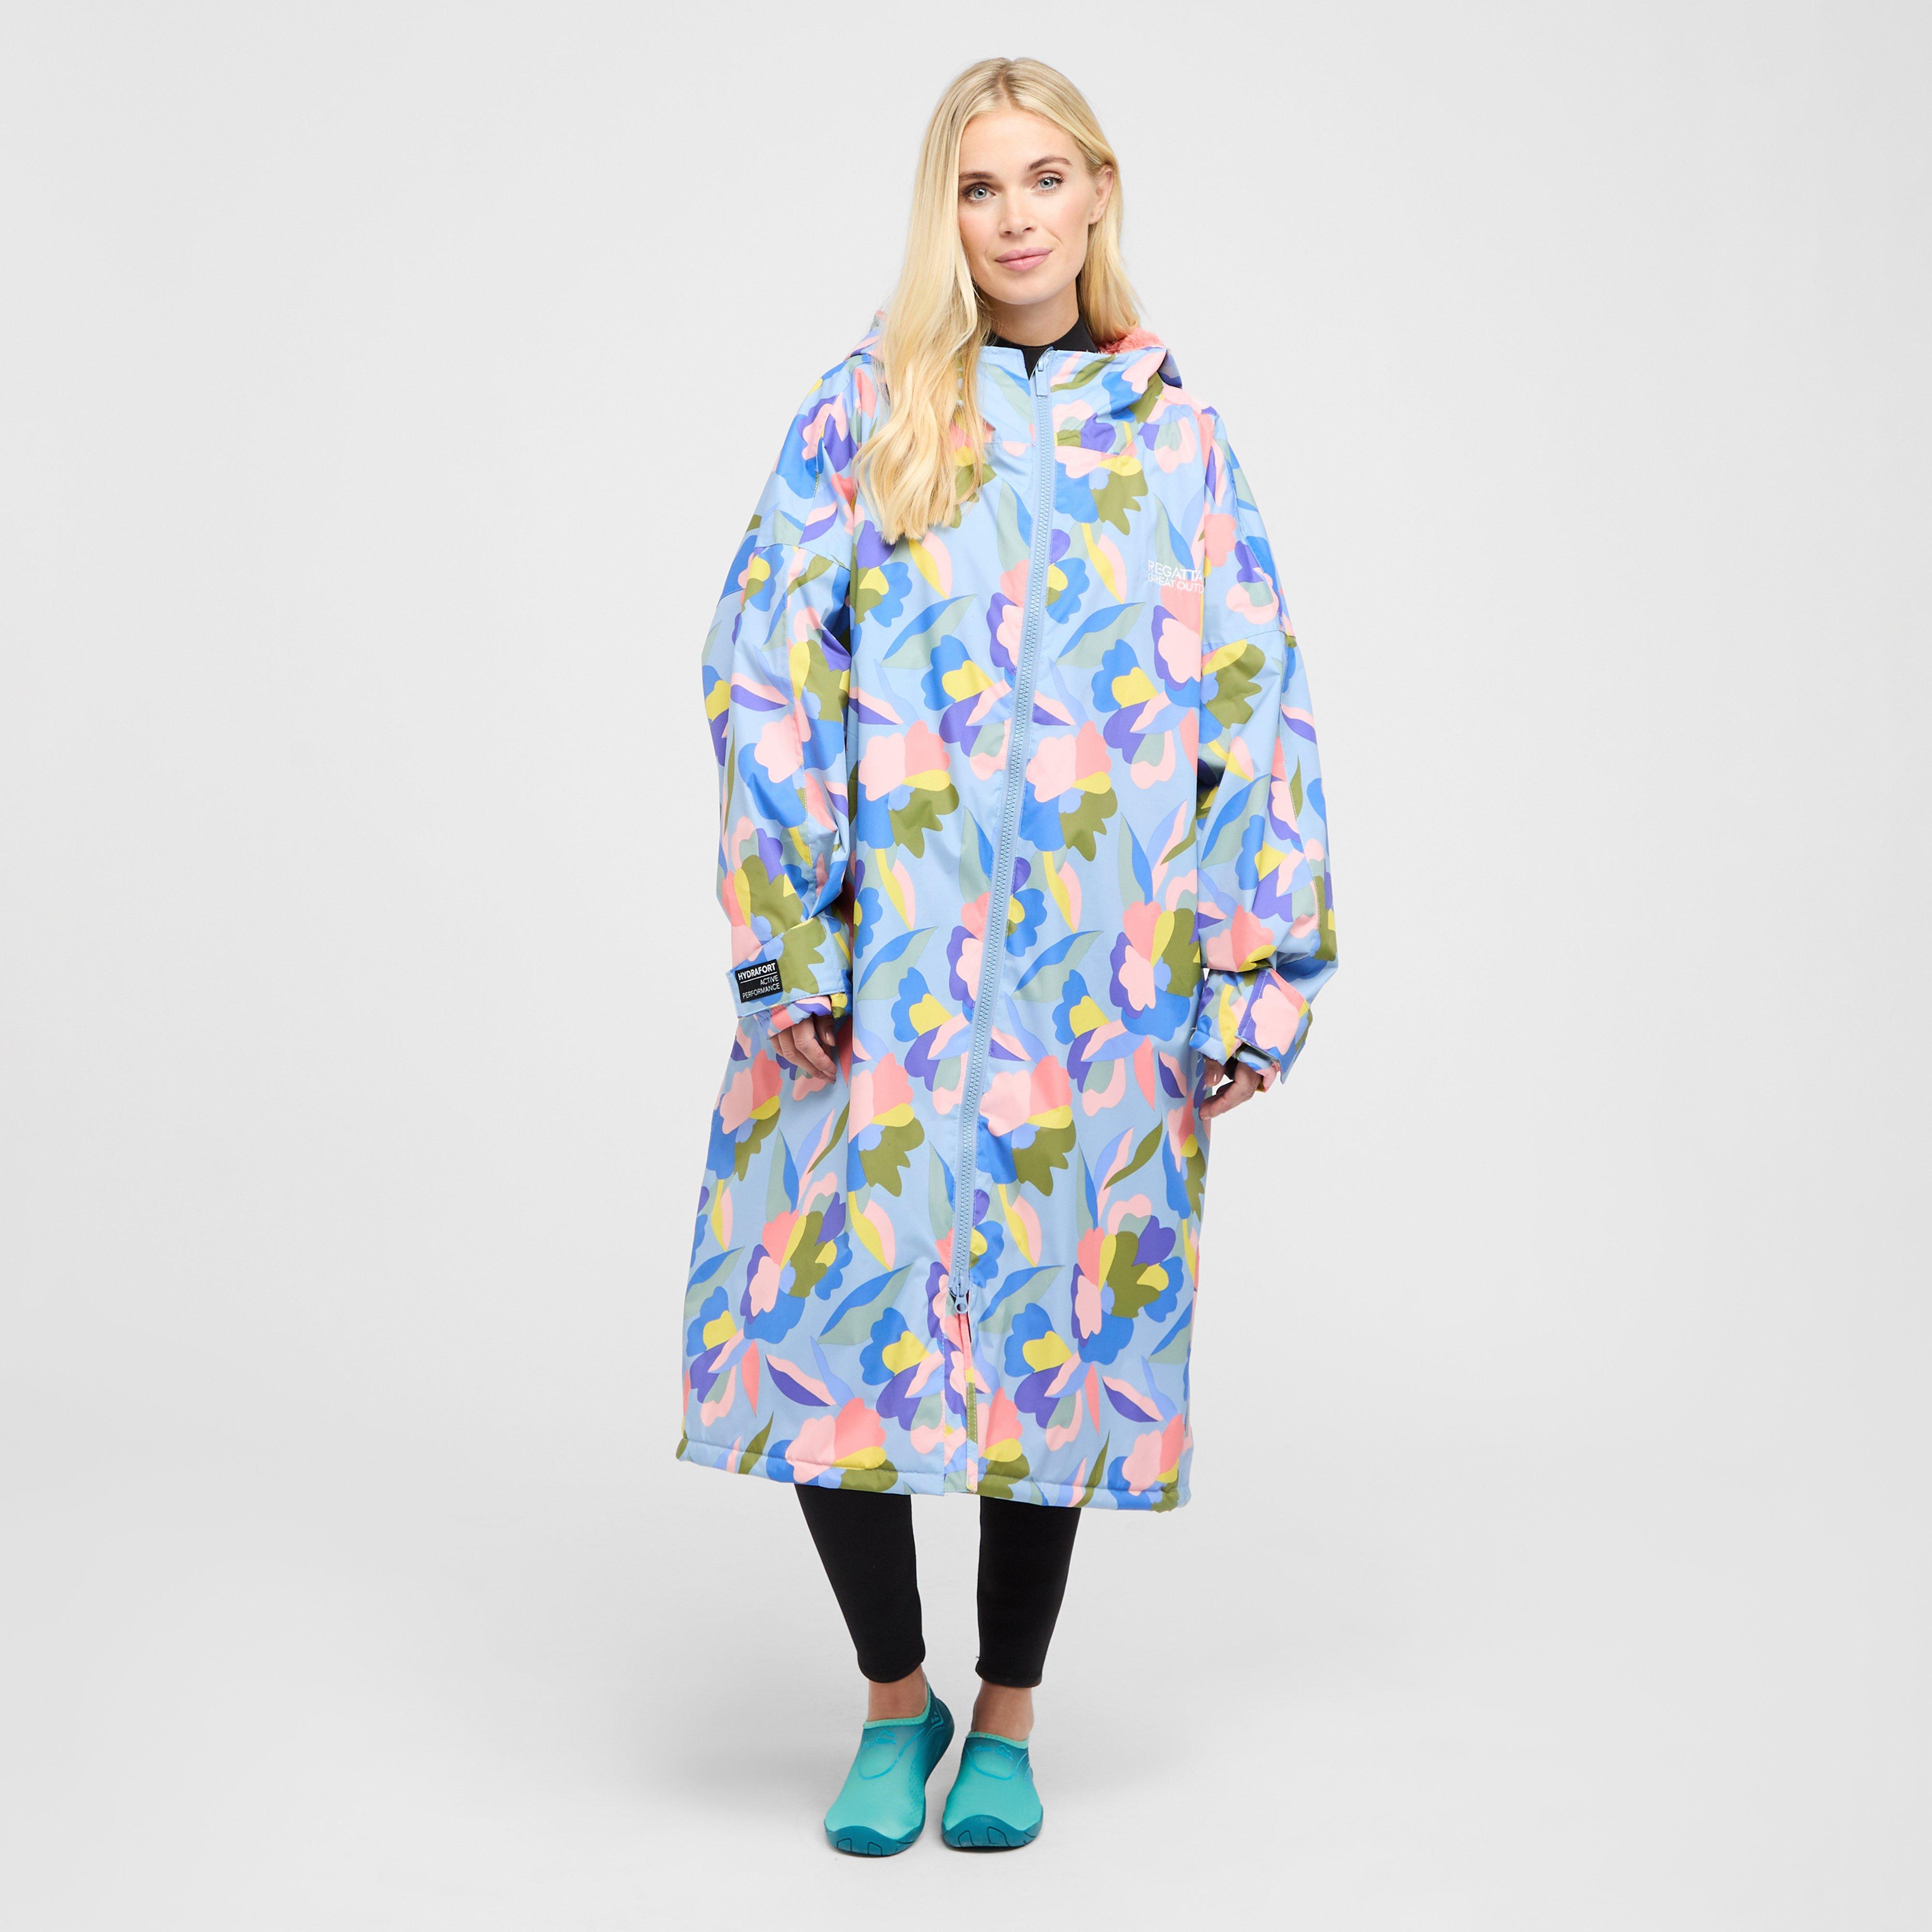 Image of Adults Waterproof Robe Abstract Floral Print